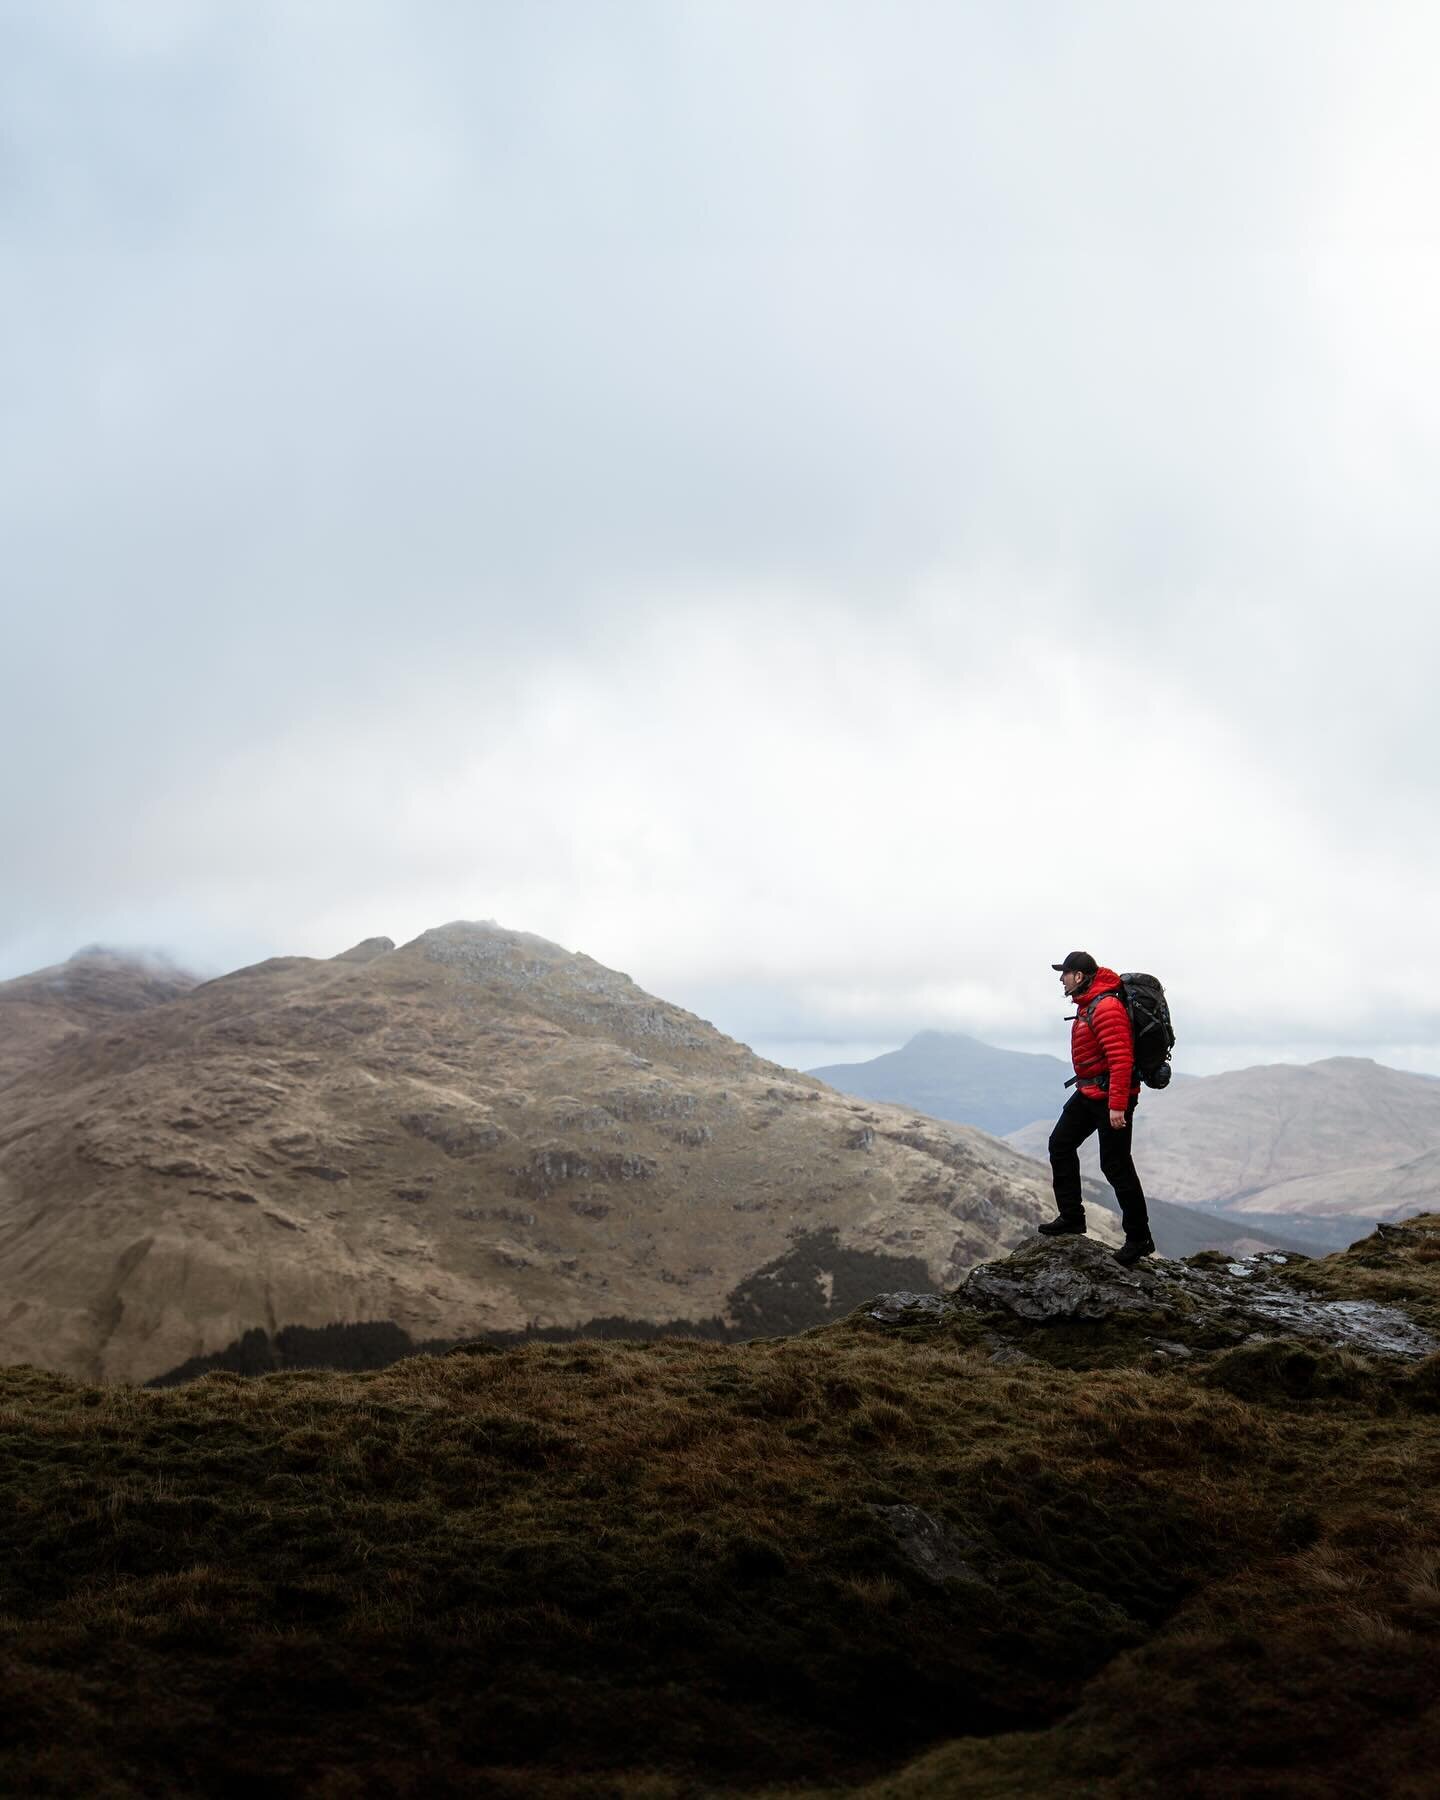 No better feeling than being out on the hills. 

The last few weeks were a challenge shooting some product work around the Scottish weather but it made for some interesting trips (this was taken right before some lovely hail and torrential rain)!

Lo